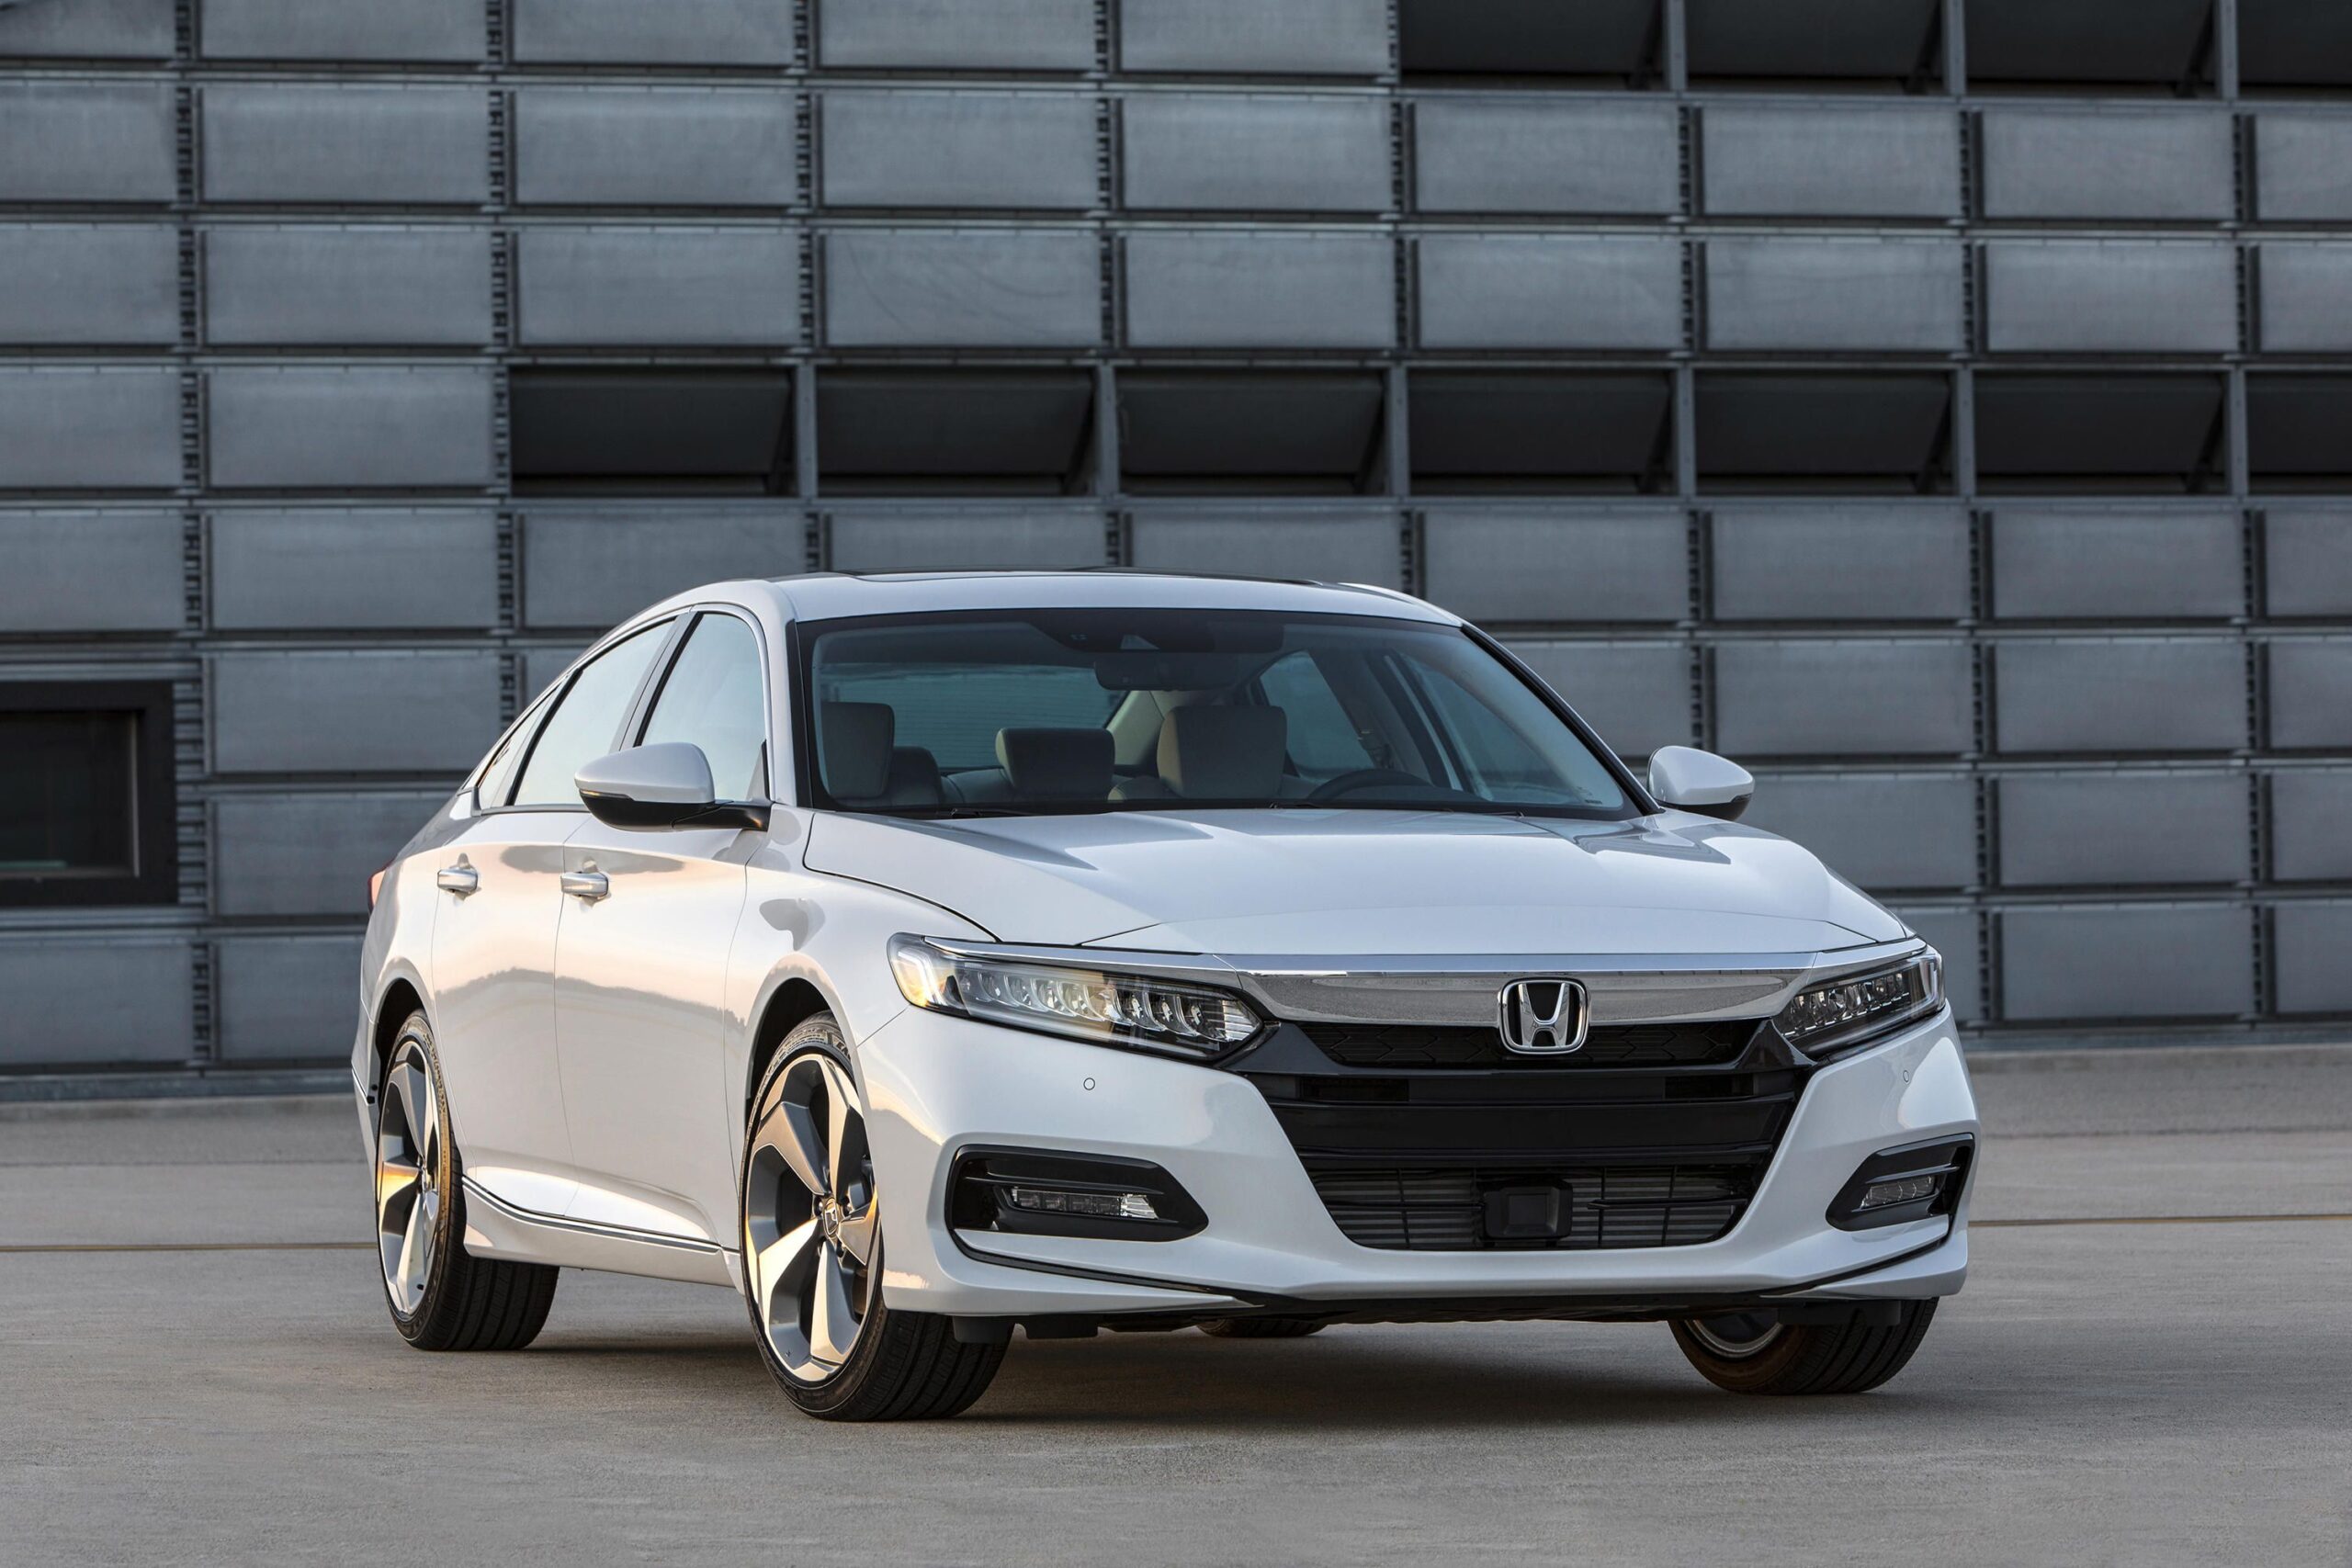 Aftermarket Replacement Windshields May Cause Honda Sensing Systems to Work Abnormally